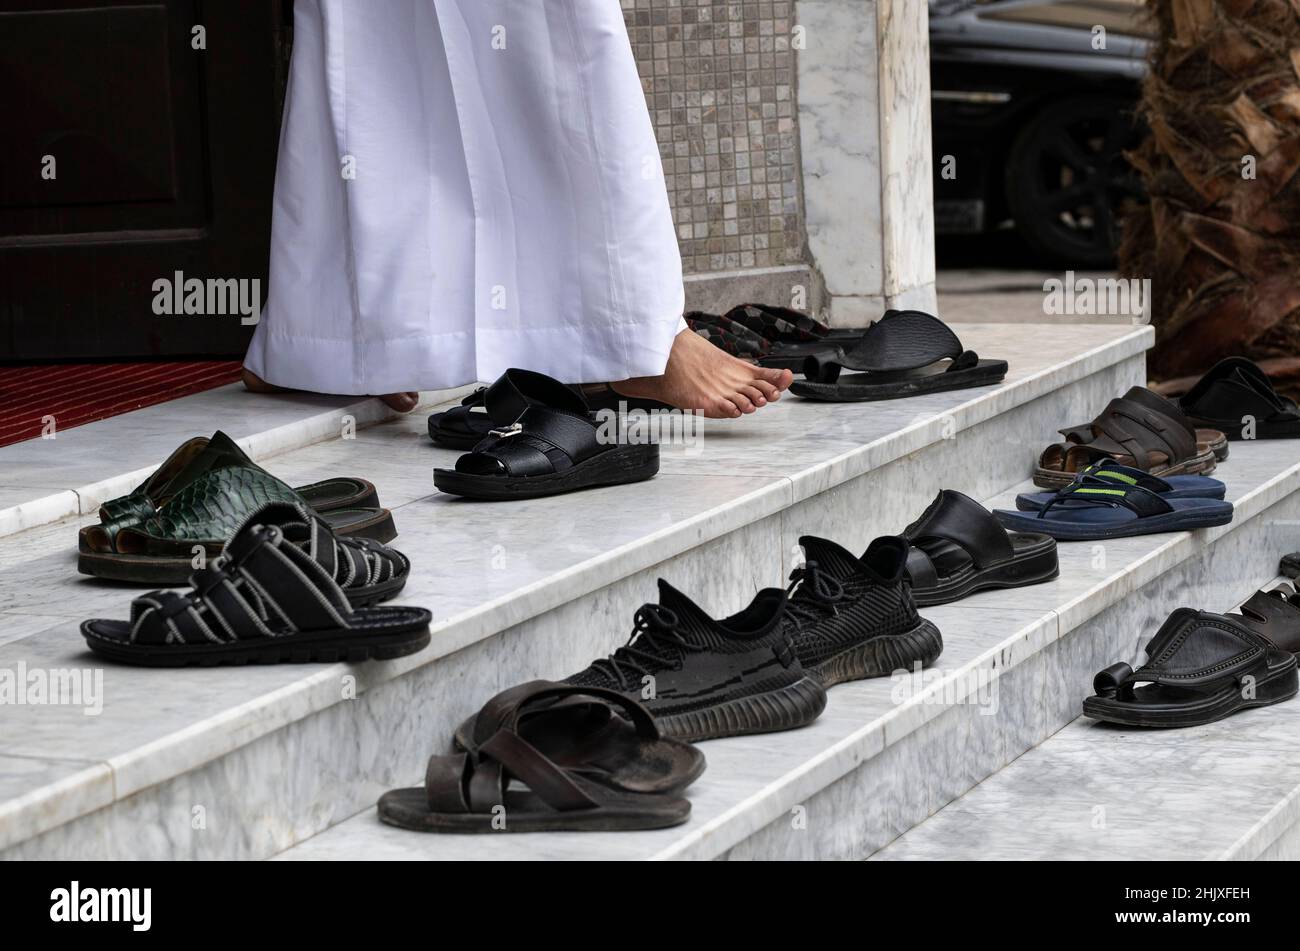 Fragment photo, only legs of arabian man going from mosque after mass. Leg and many shoes outside on the stairs. Shoes of prayers near mosque, islam r Stock Photo